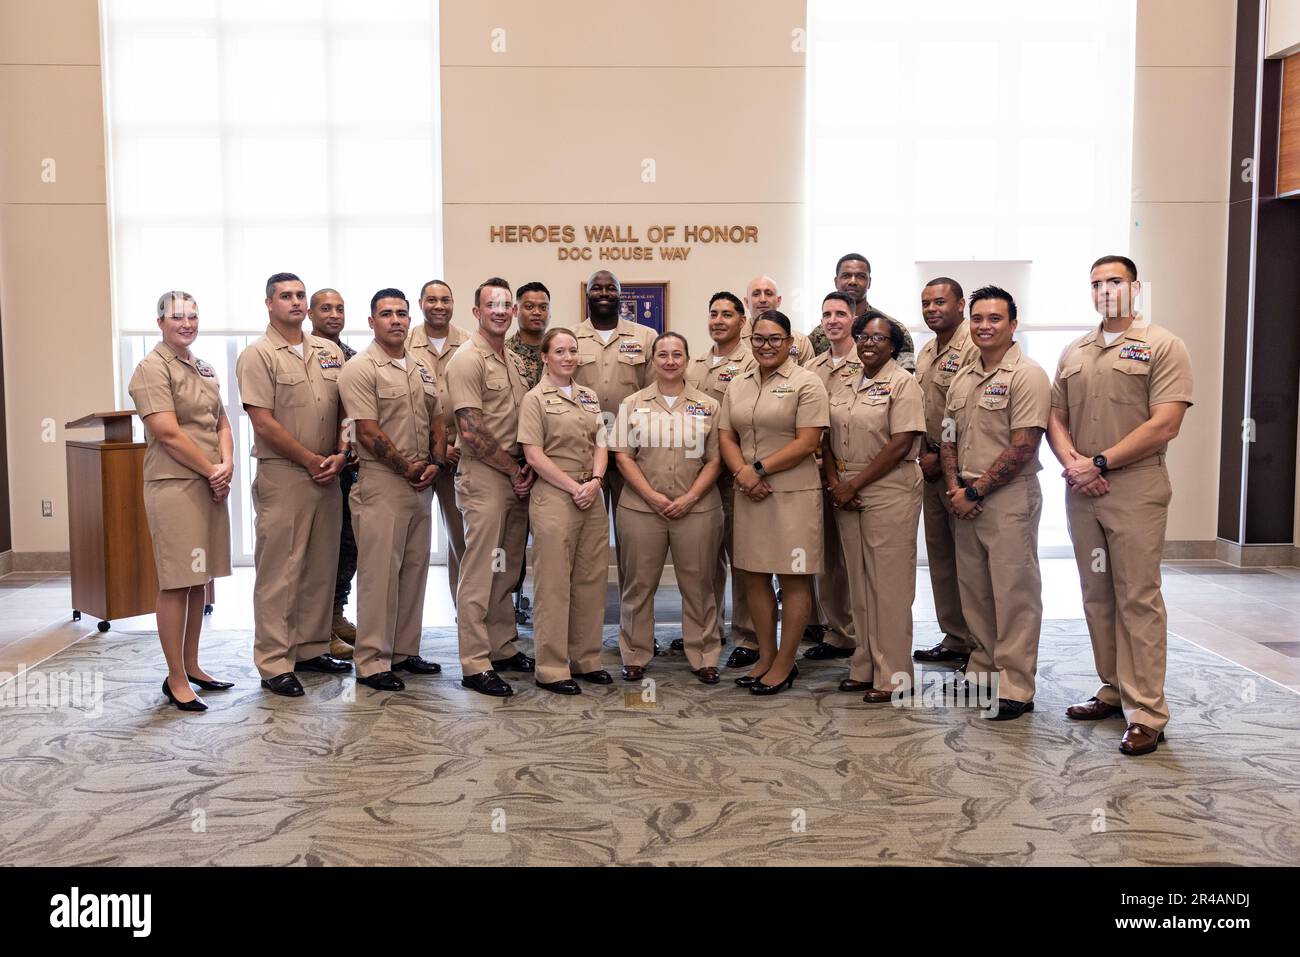 U.S. Navy Sailors pose for a photo during the 130th Chief Petty Officer Birthday cake cutting ceremony, Marine Corps Base Hawaii, March 31, 2023. The celebration commemorated 130 years of lineage for Chief Petty Officers across MCBH. Stock Photo